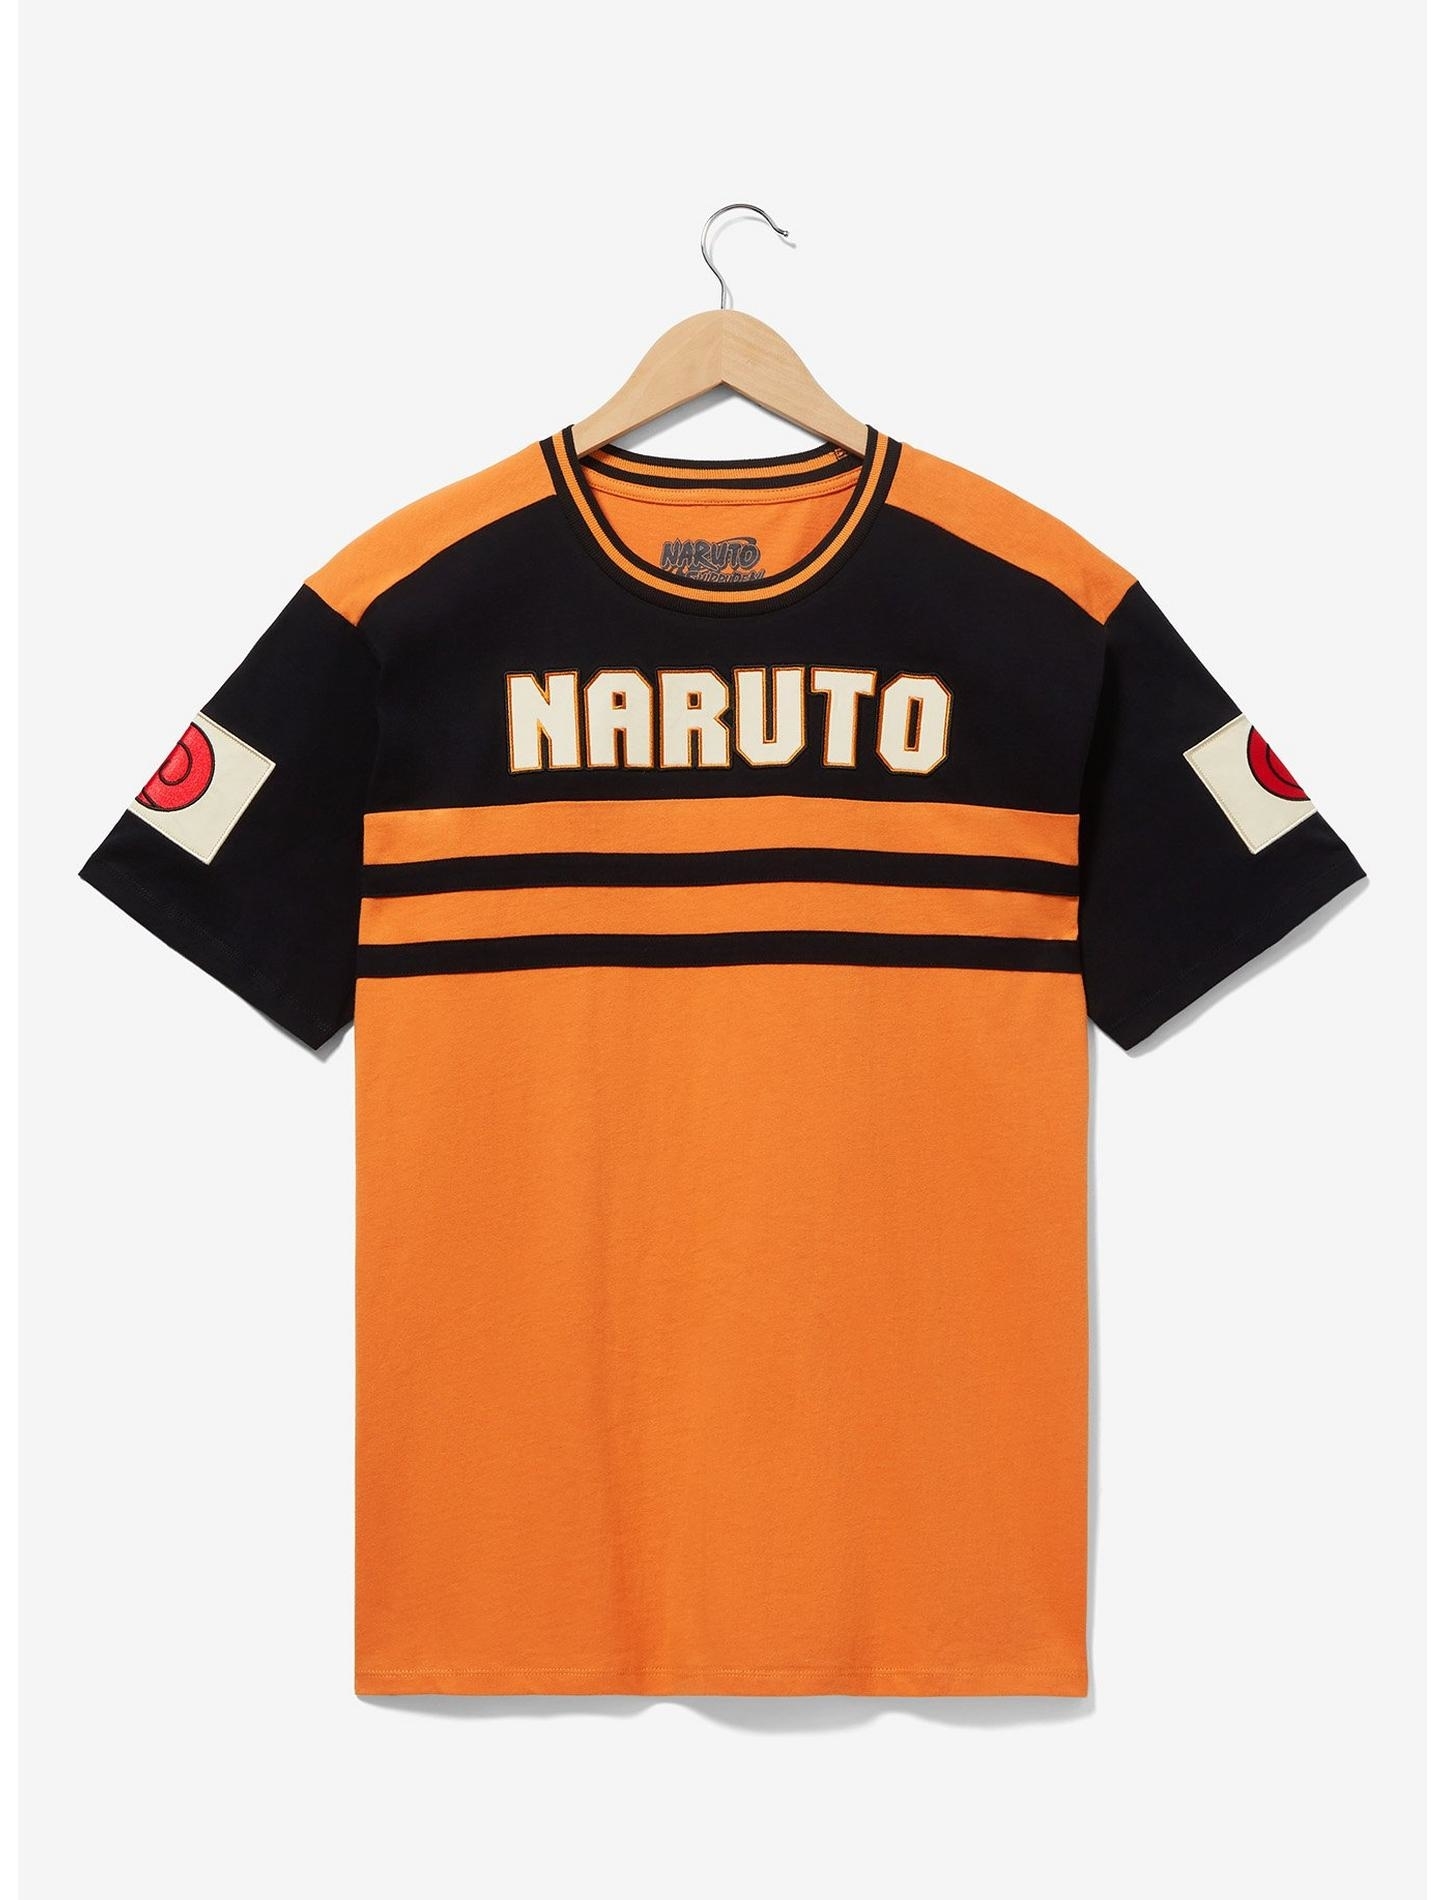 Graphic tee with &quot;NARUTO&quot; text, hanging against a plain background, inspired by the anime